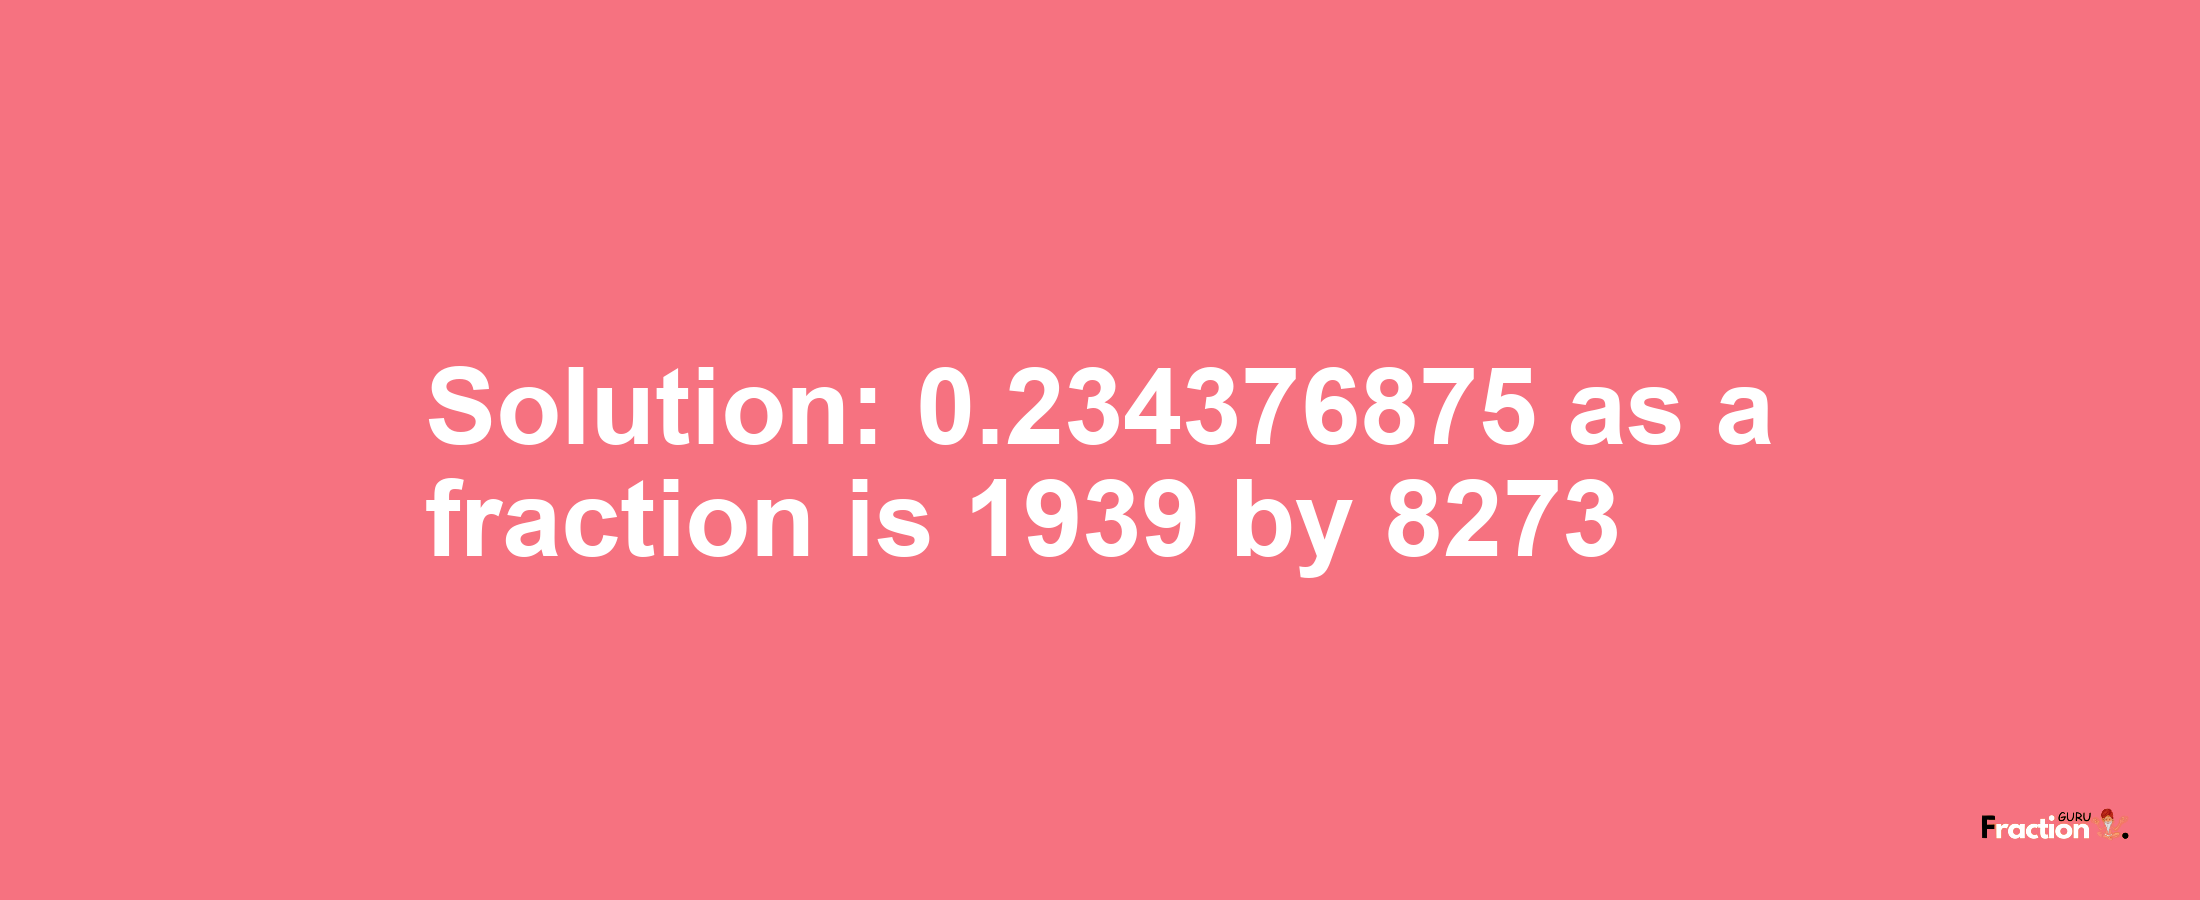 Solution:0.234376875 as a fraction is 1939/8273